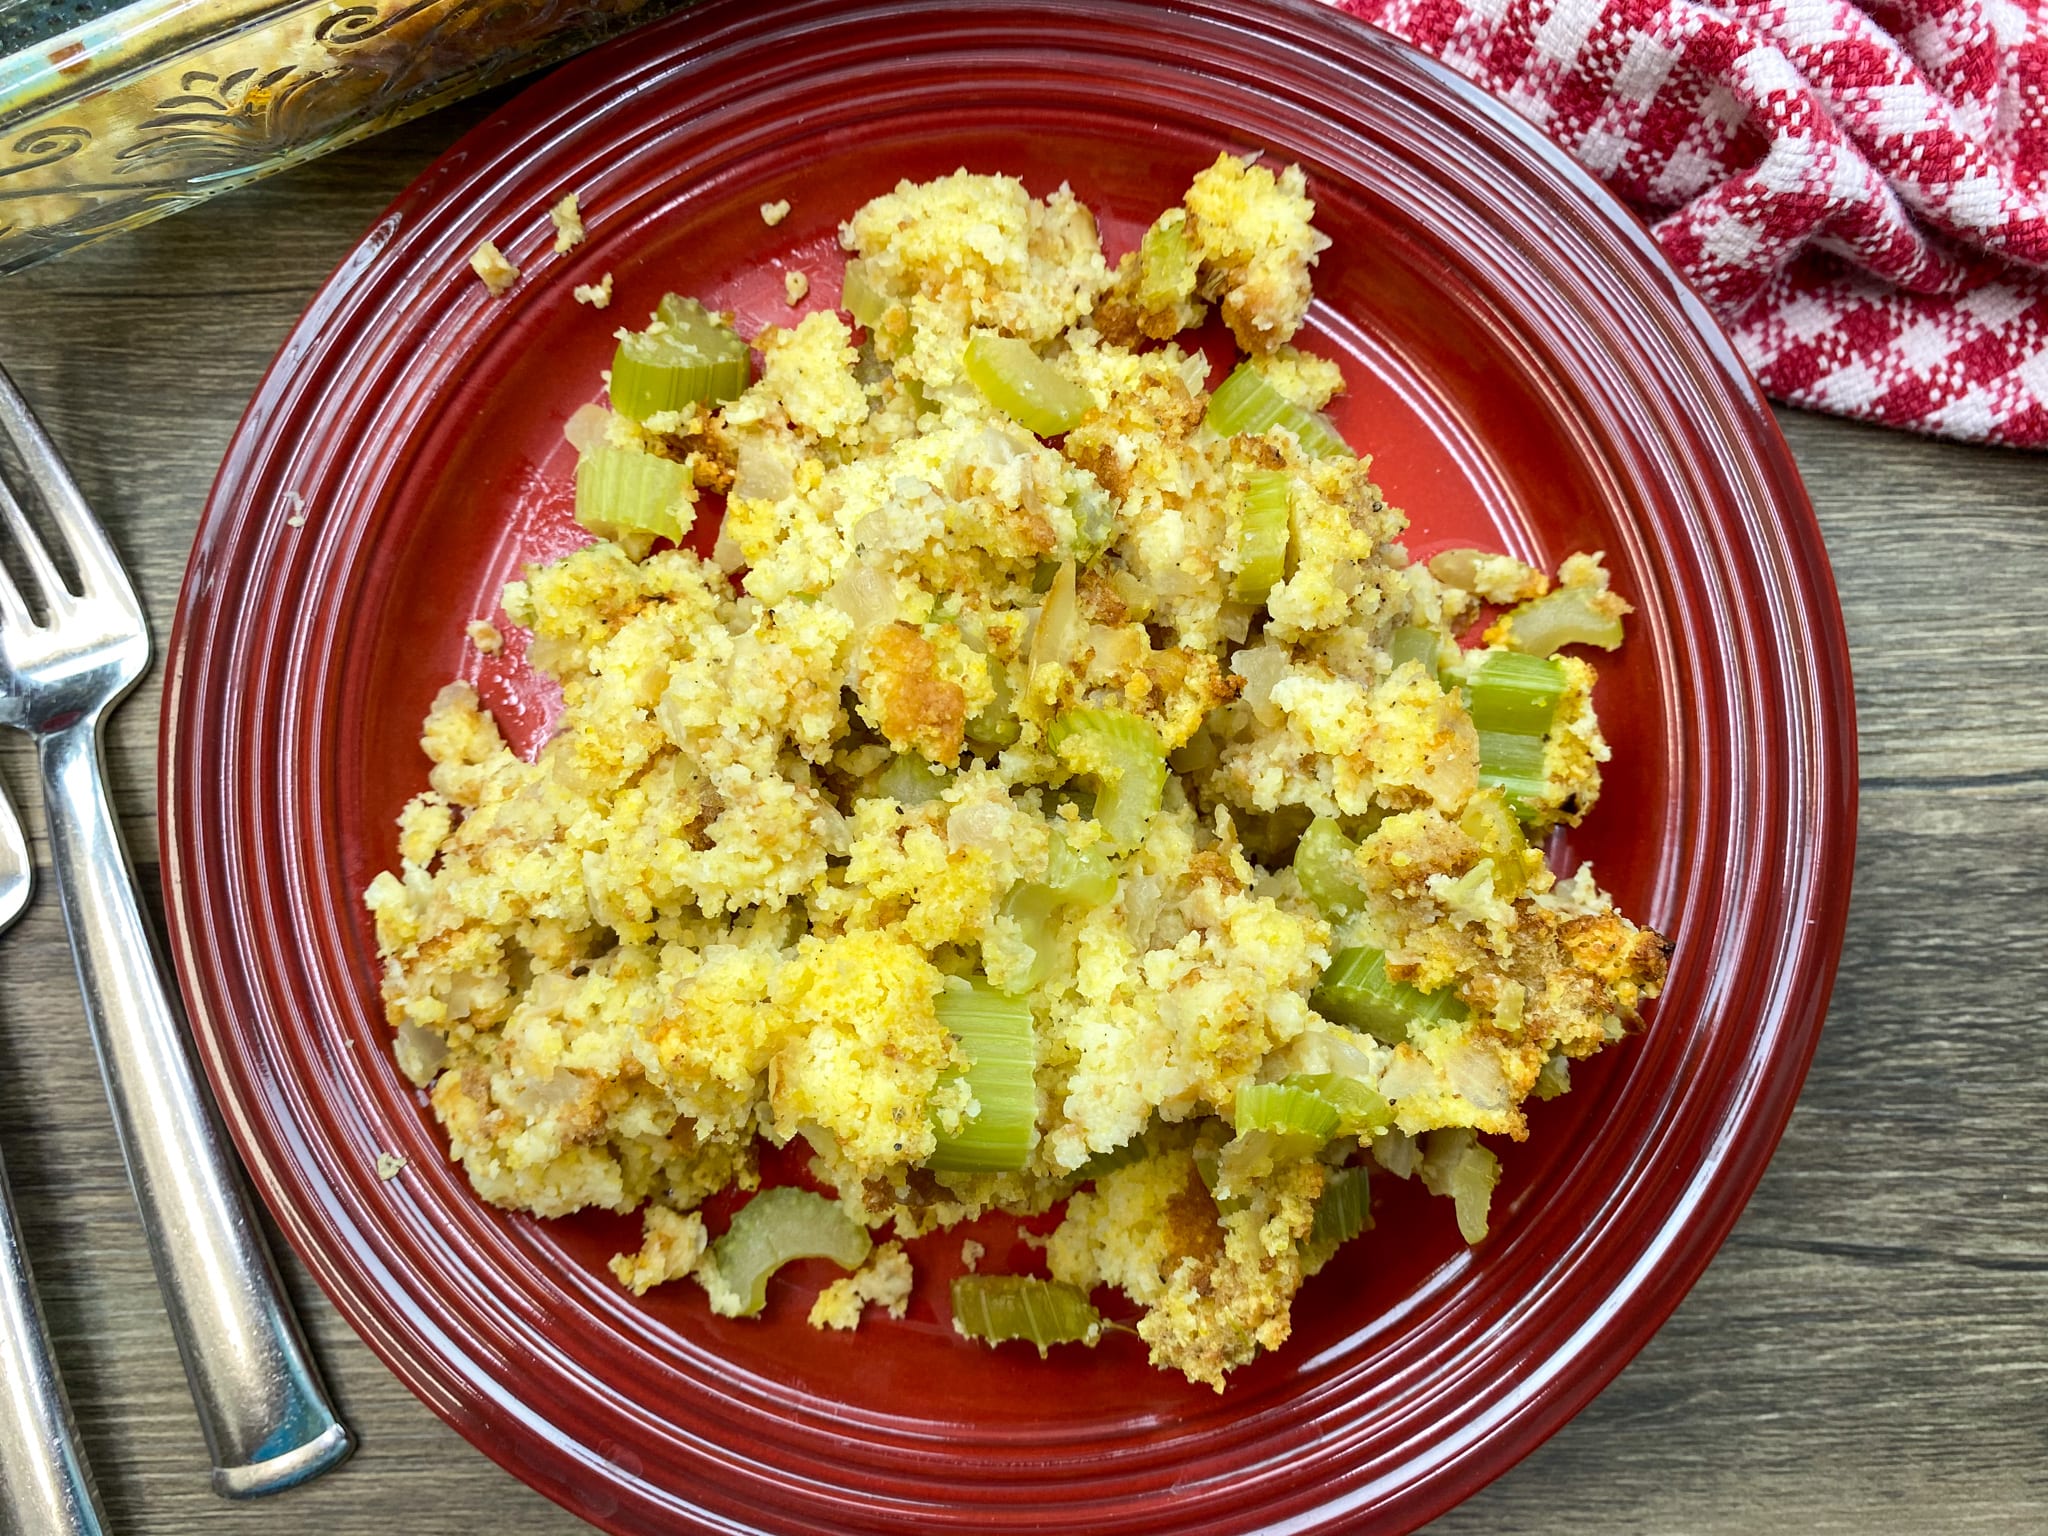 Easy Cornbread Dressing - Use Jiffy or homemade, your choice!